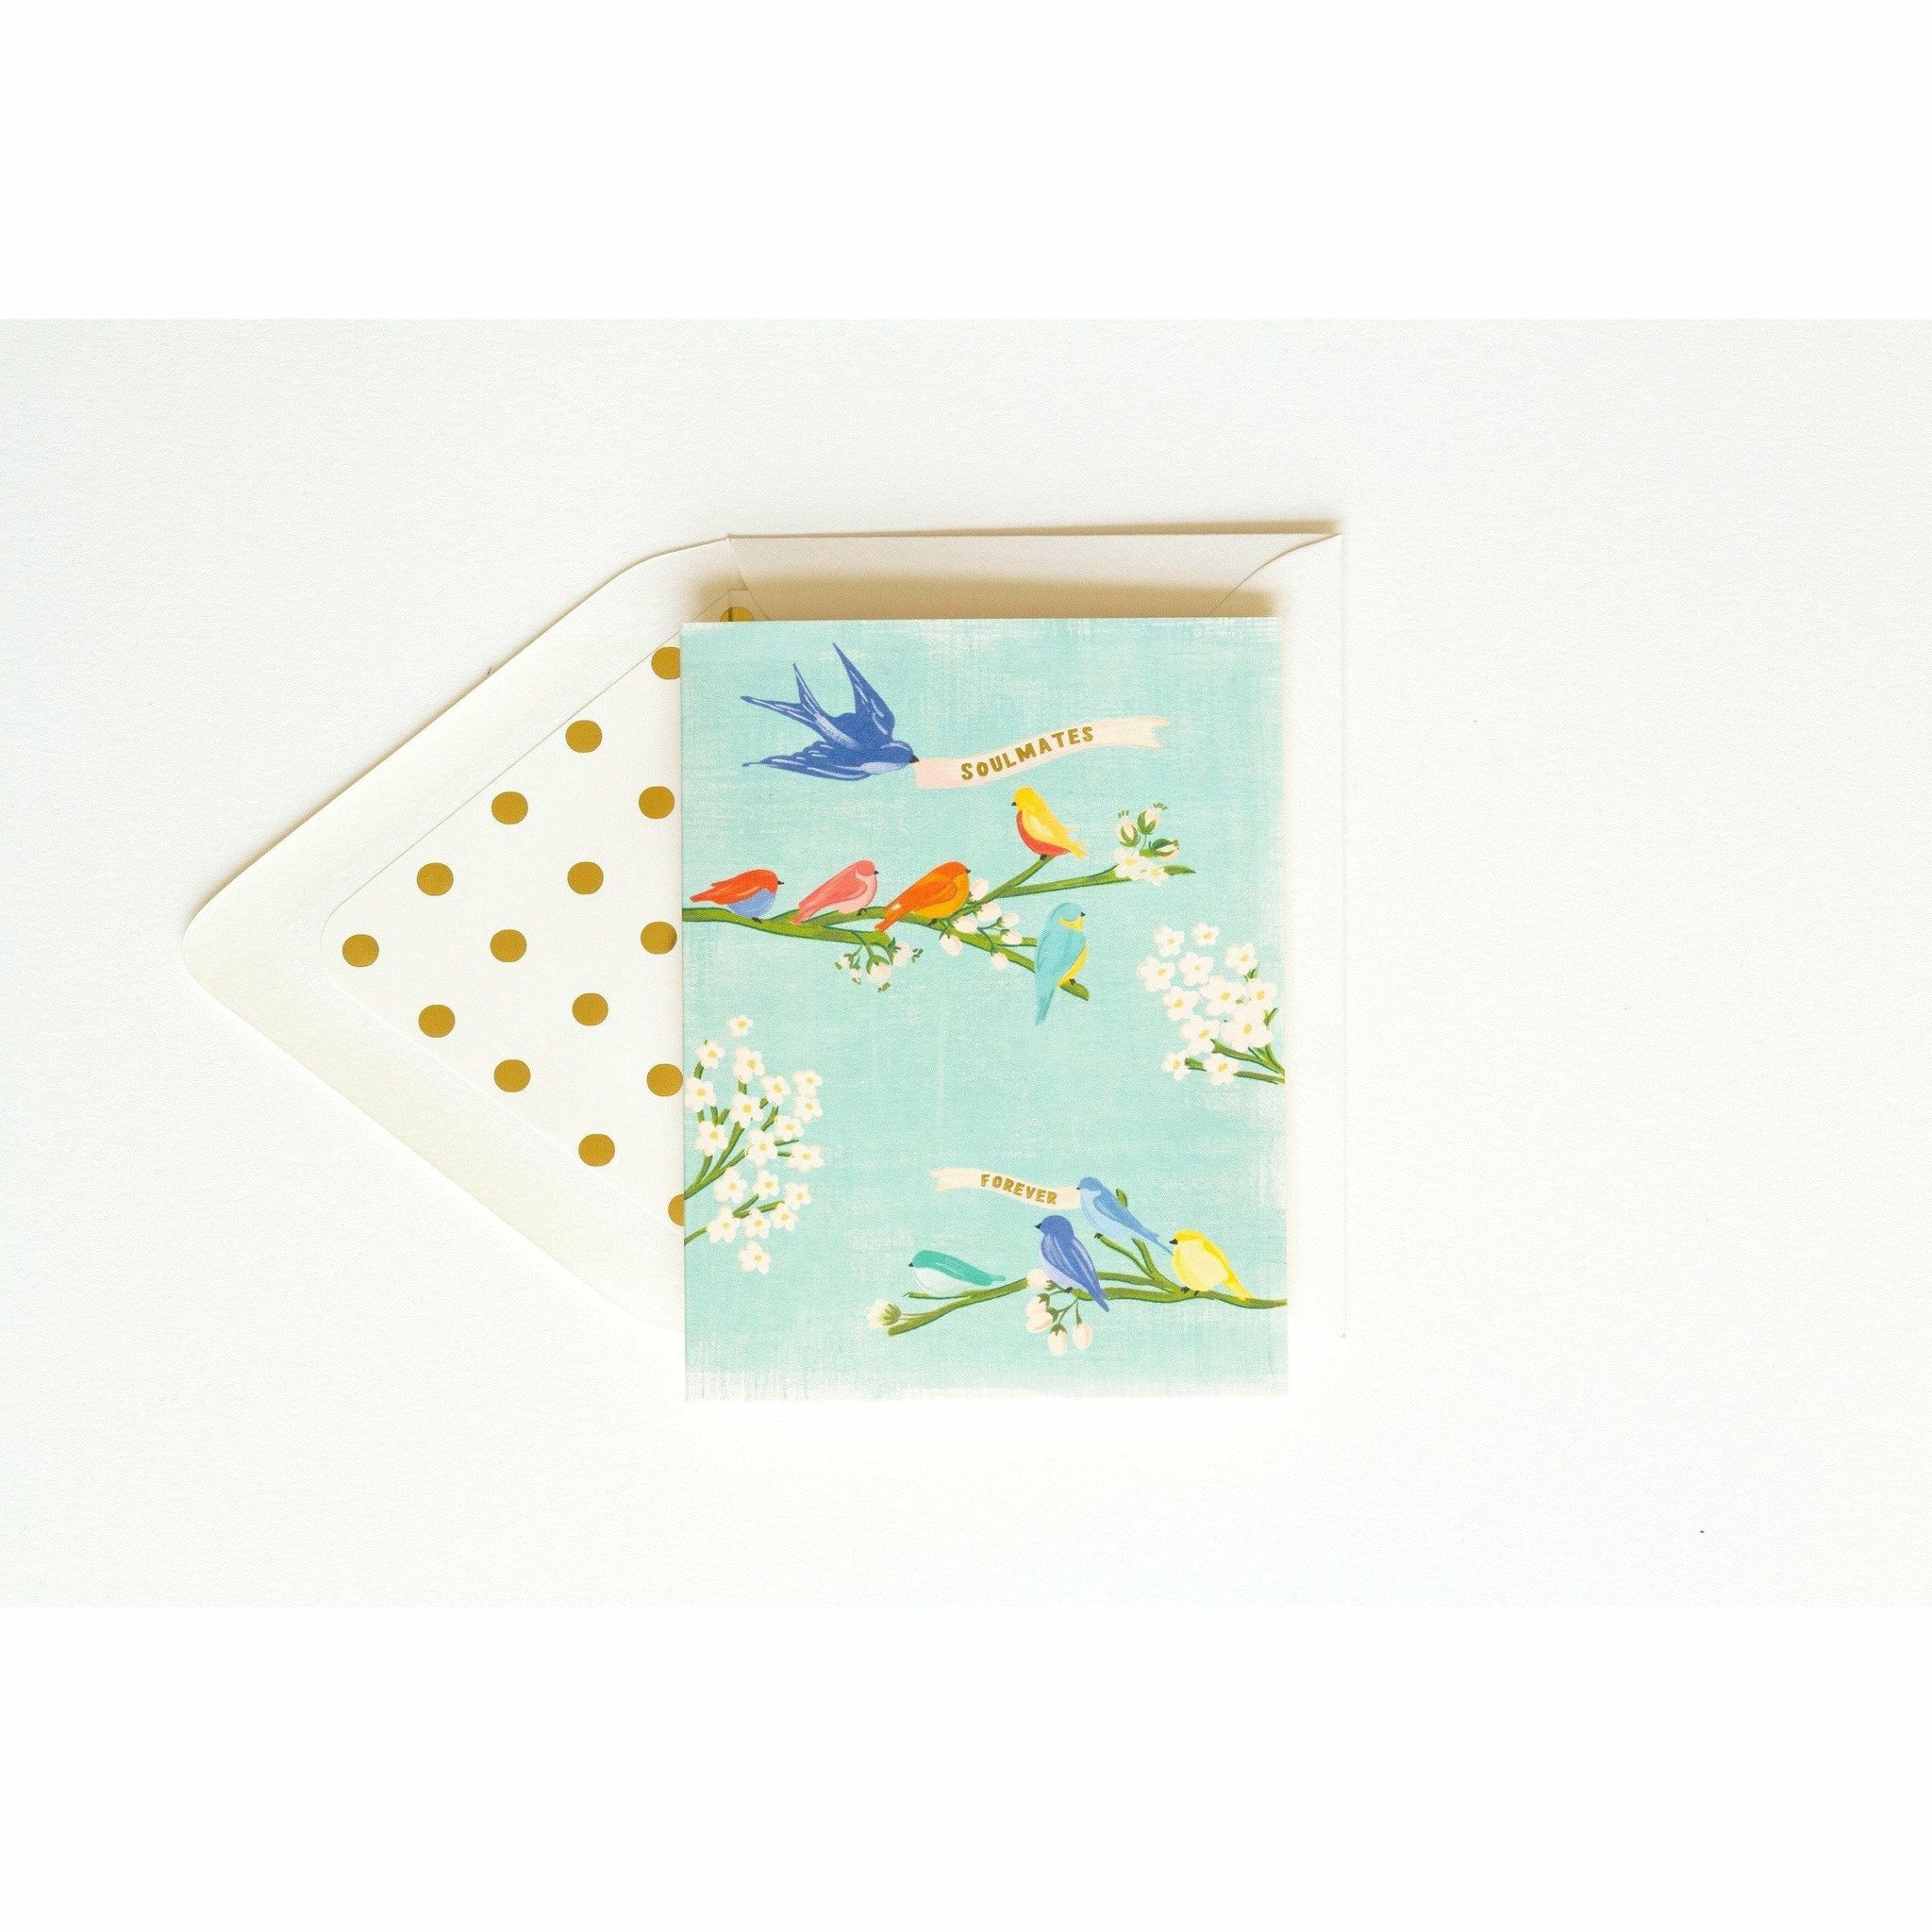 Painted Soulmates Forever Card with Bird and Floral Design - The First Snow